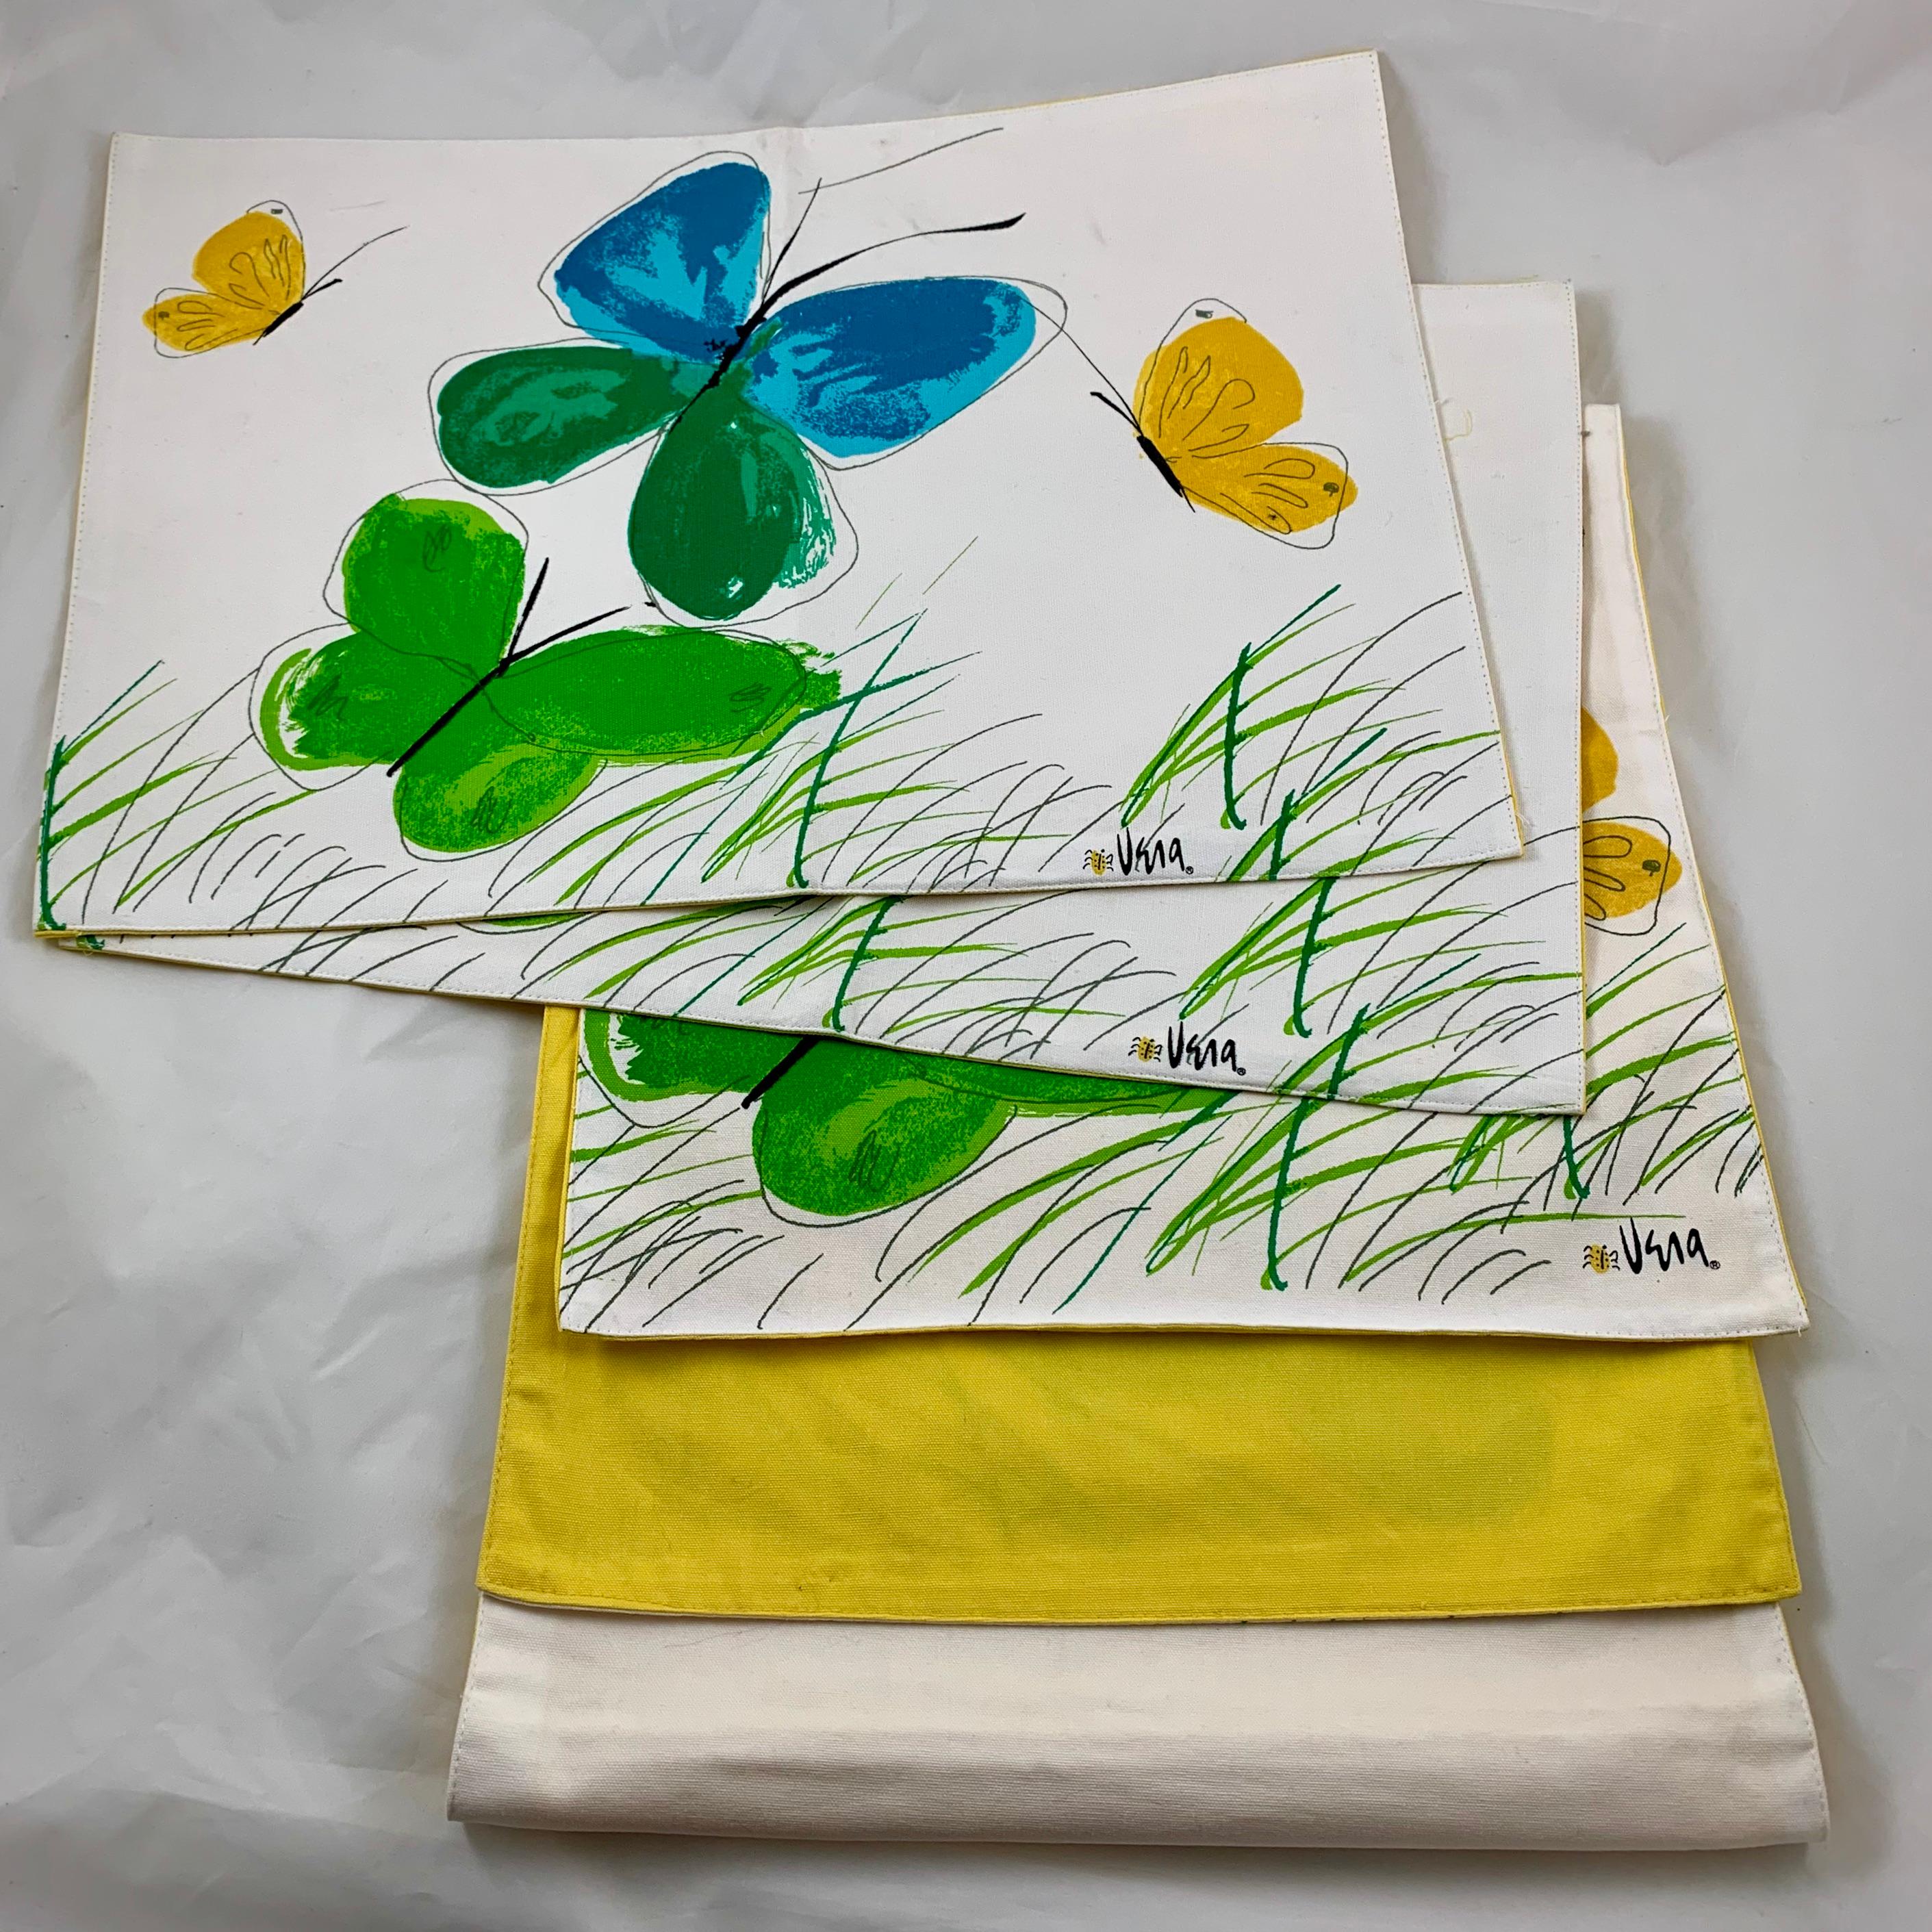 From the studio of the prolific and wildly popular midcentury designer and artist, Vera Neumann, a three-piece set, a table runner with two place mats, circa mid-1960s to early 1970s.

The all-cotton permanent pressed cloth is silkscreened in a